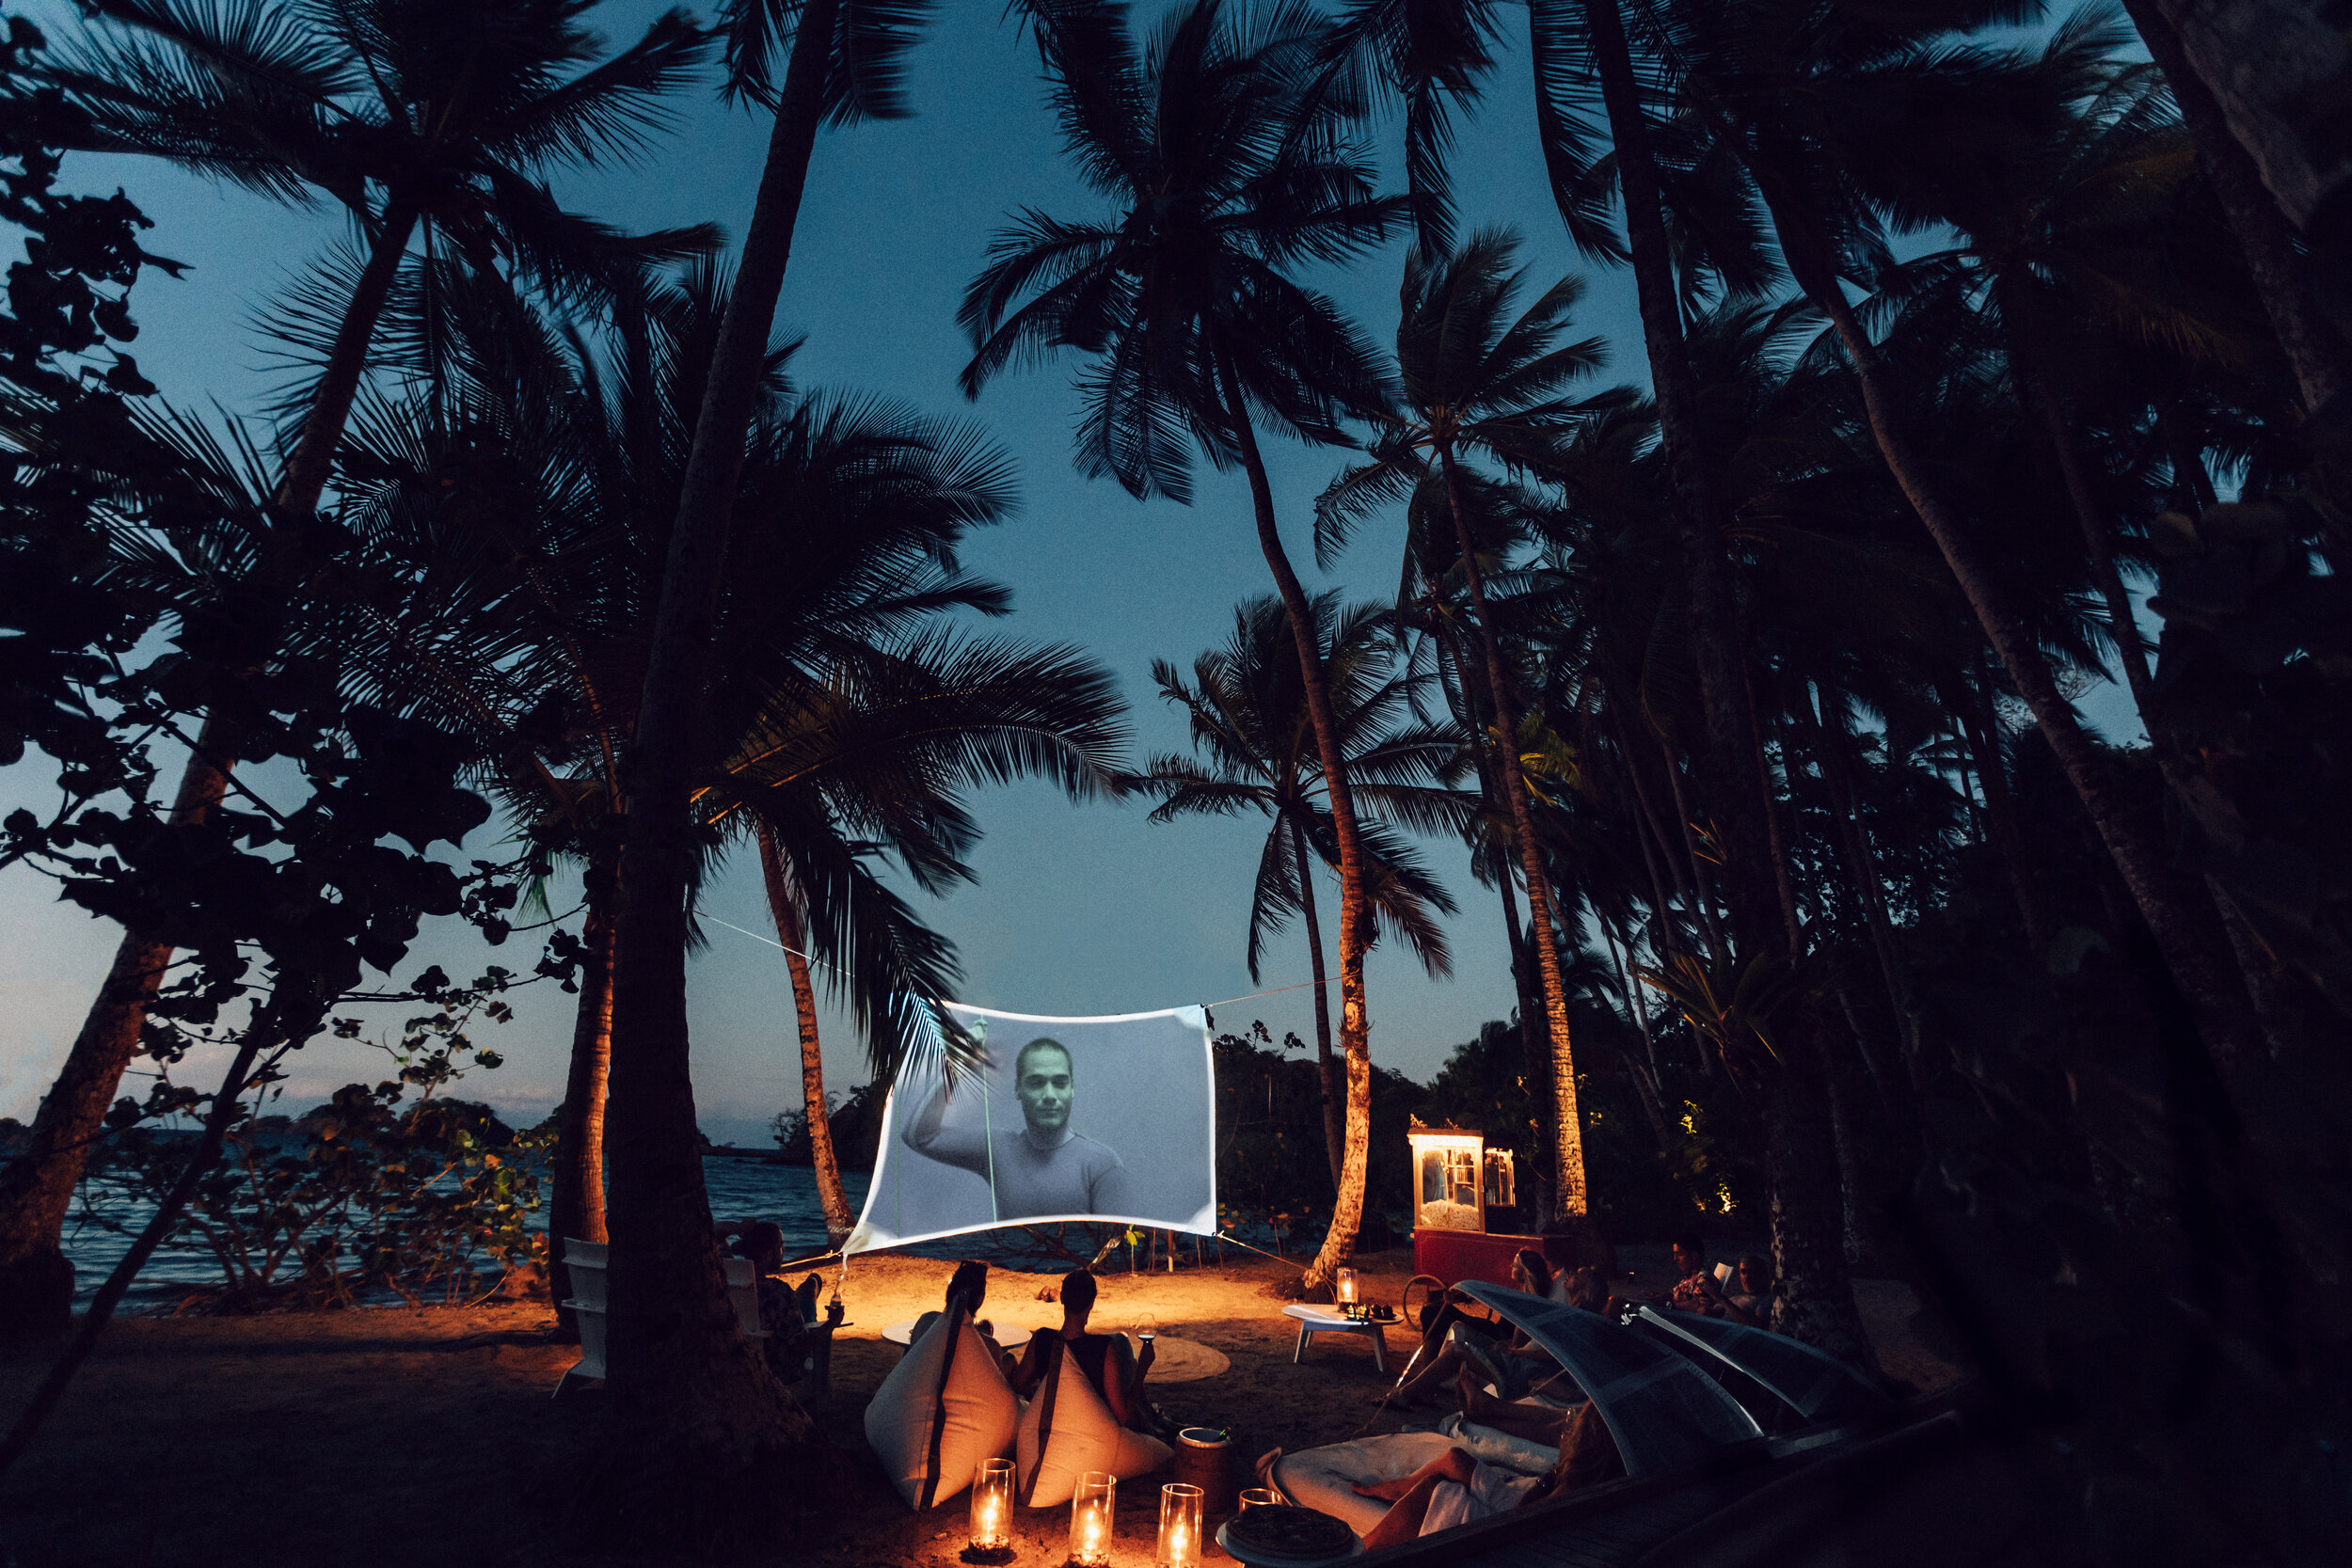   Movie night on the beach at Islas Secas (photo credit: Dominique DeBay Collection)  